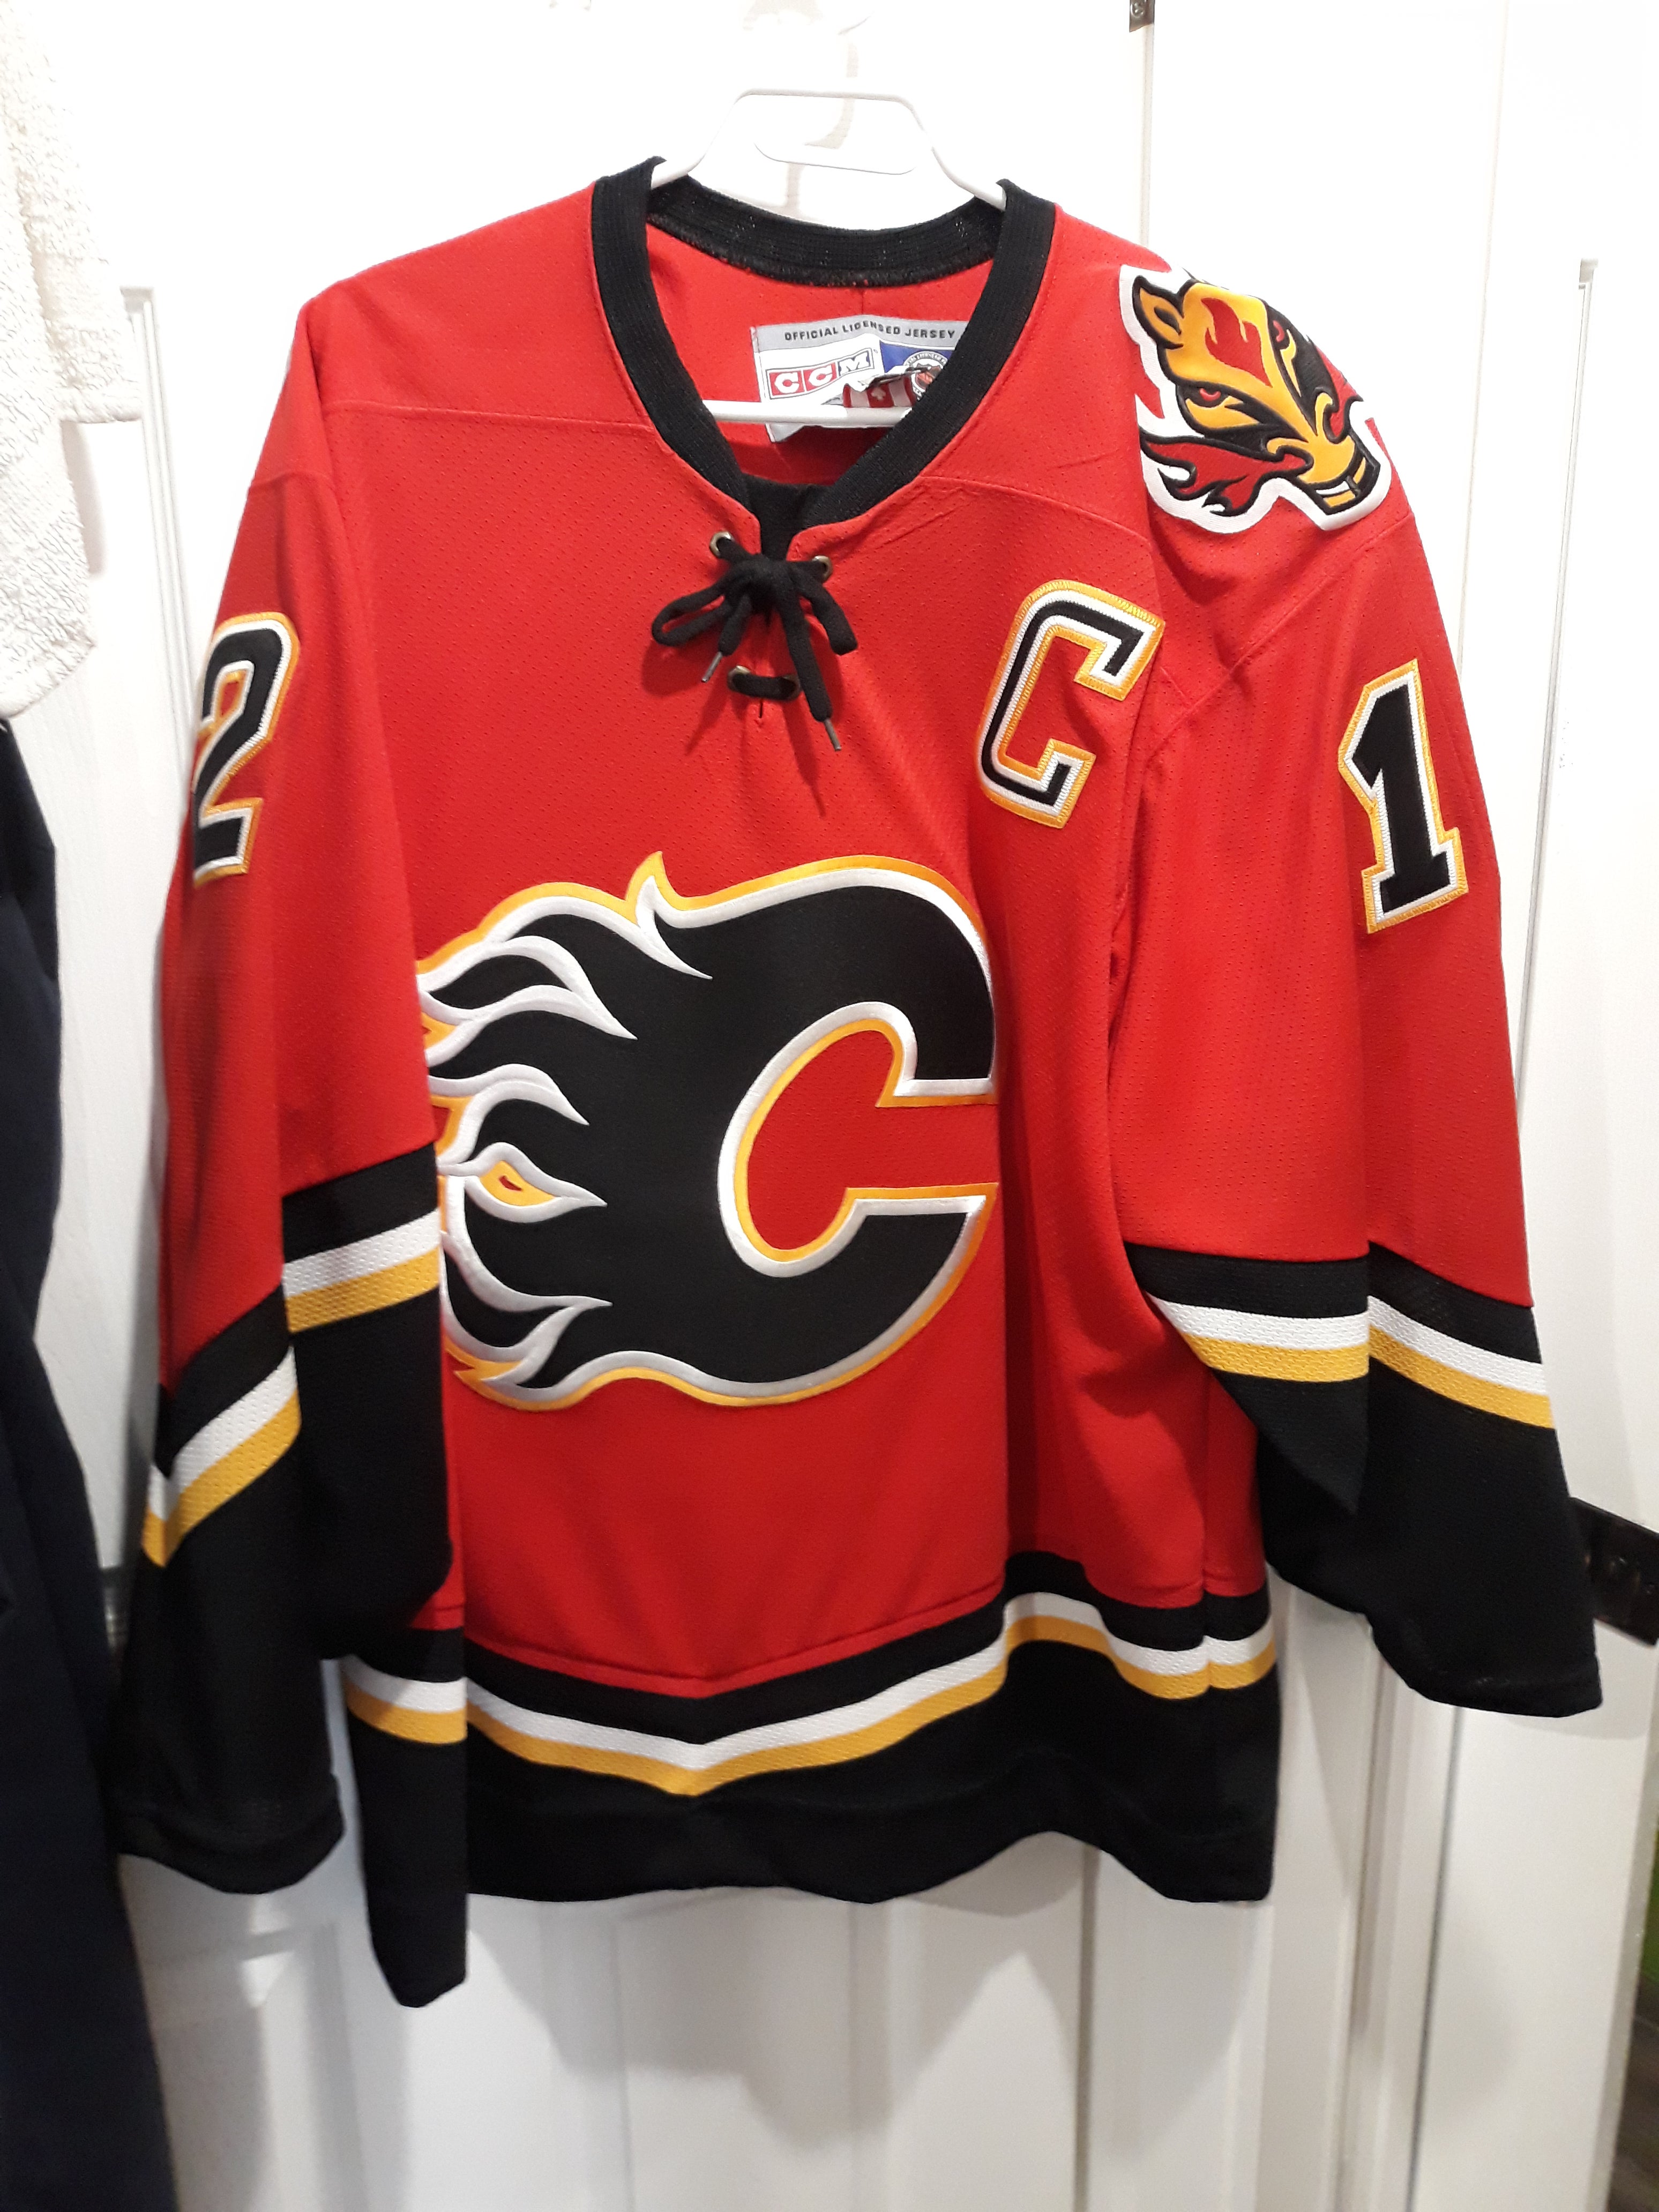 Jarome Iginla Calgary Flames Autographed 2004 Stanley Cup Finals Jersey -  NHL Auctions